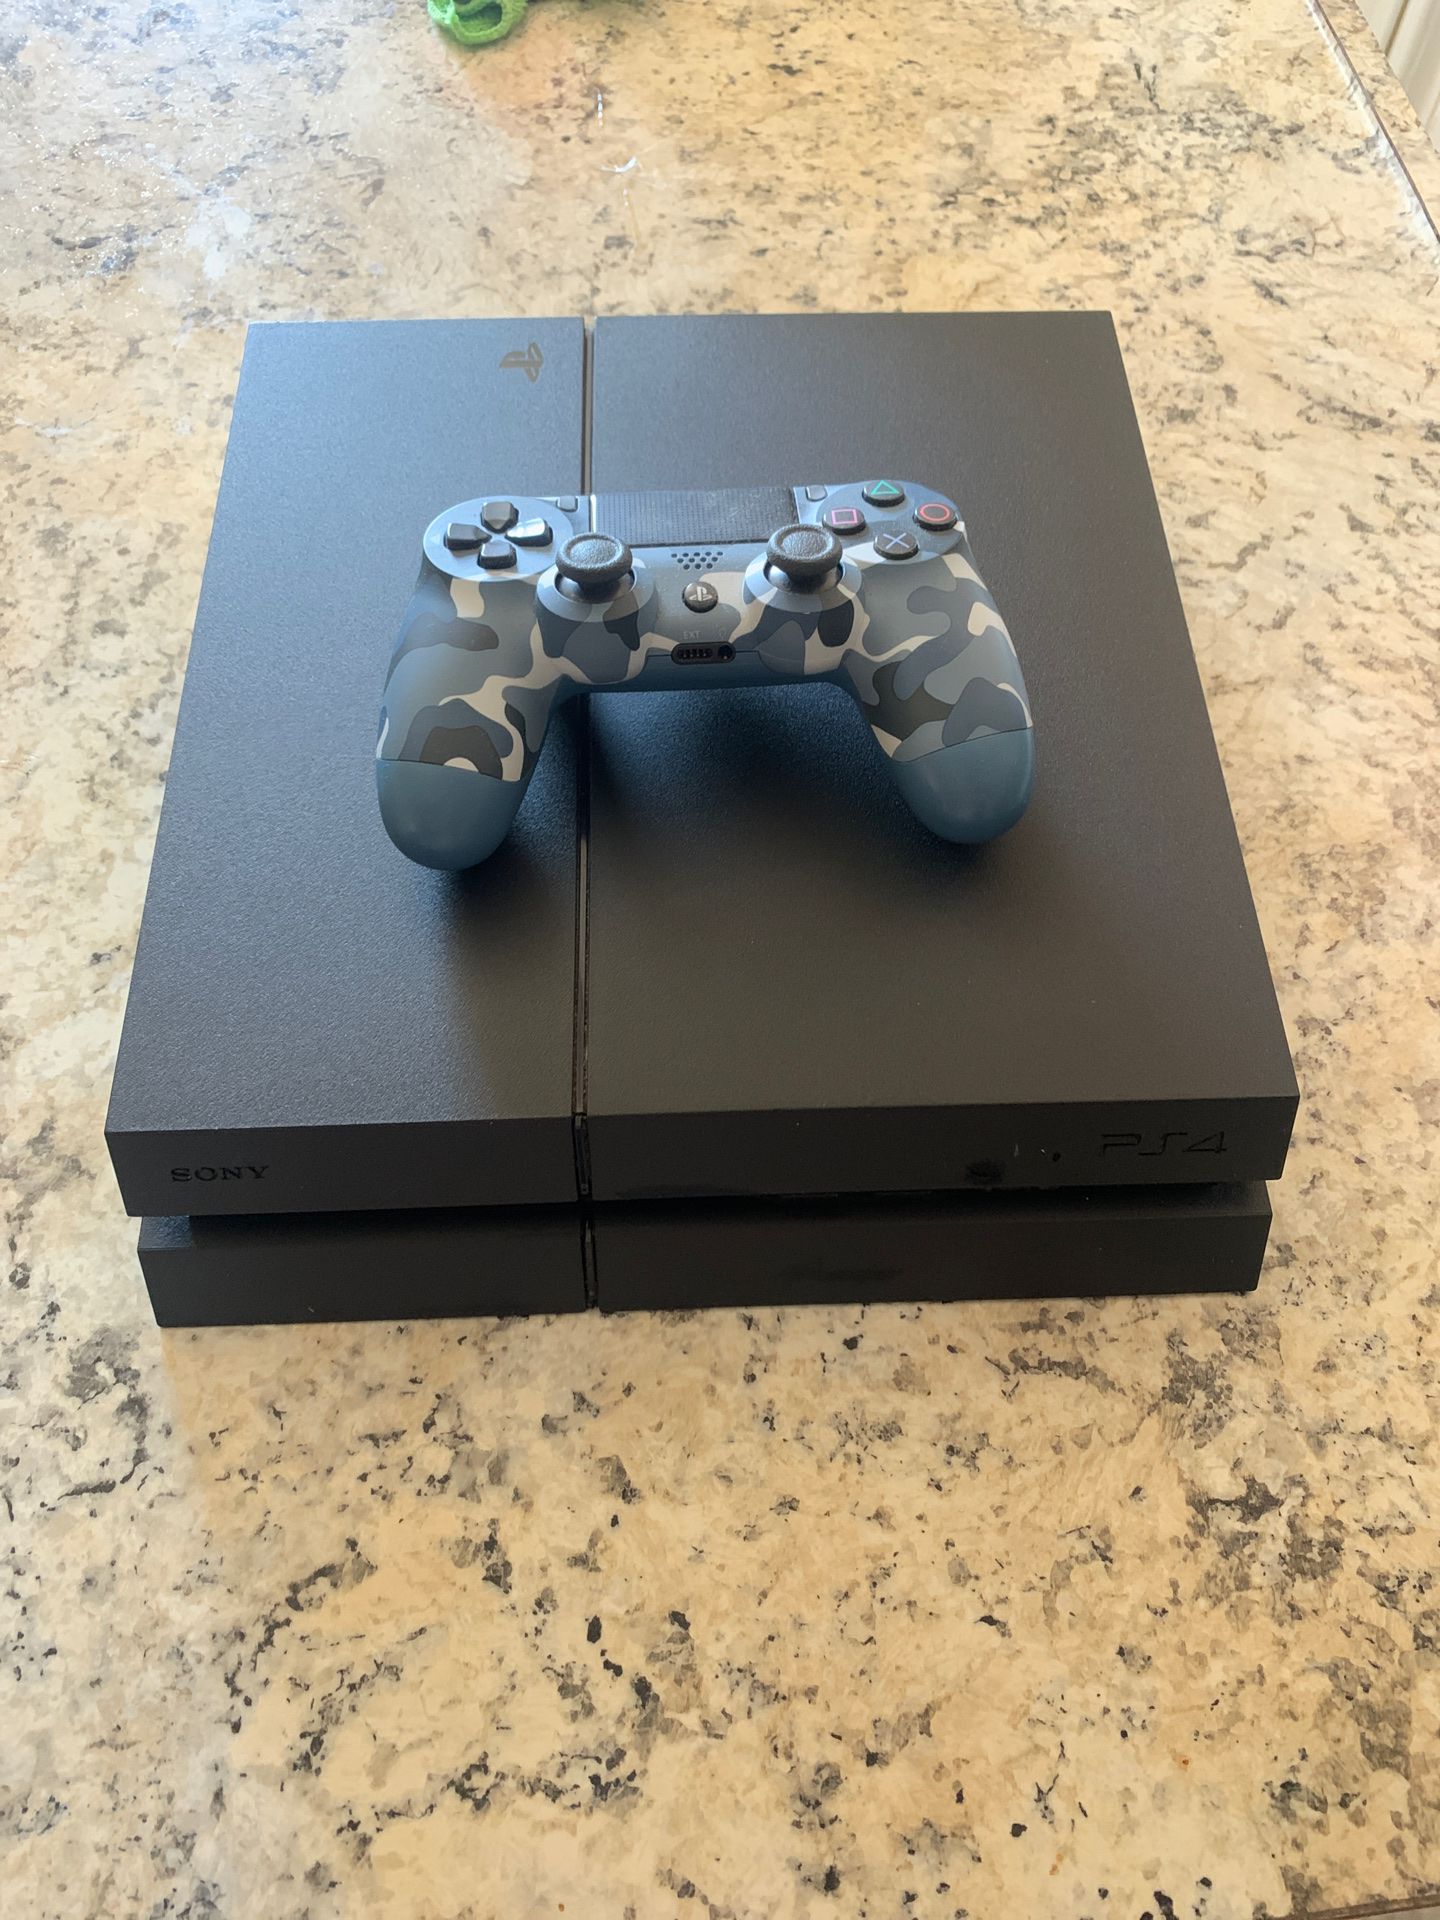 Ps4 500gb and controller